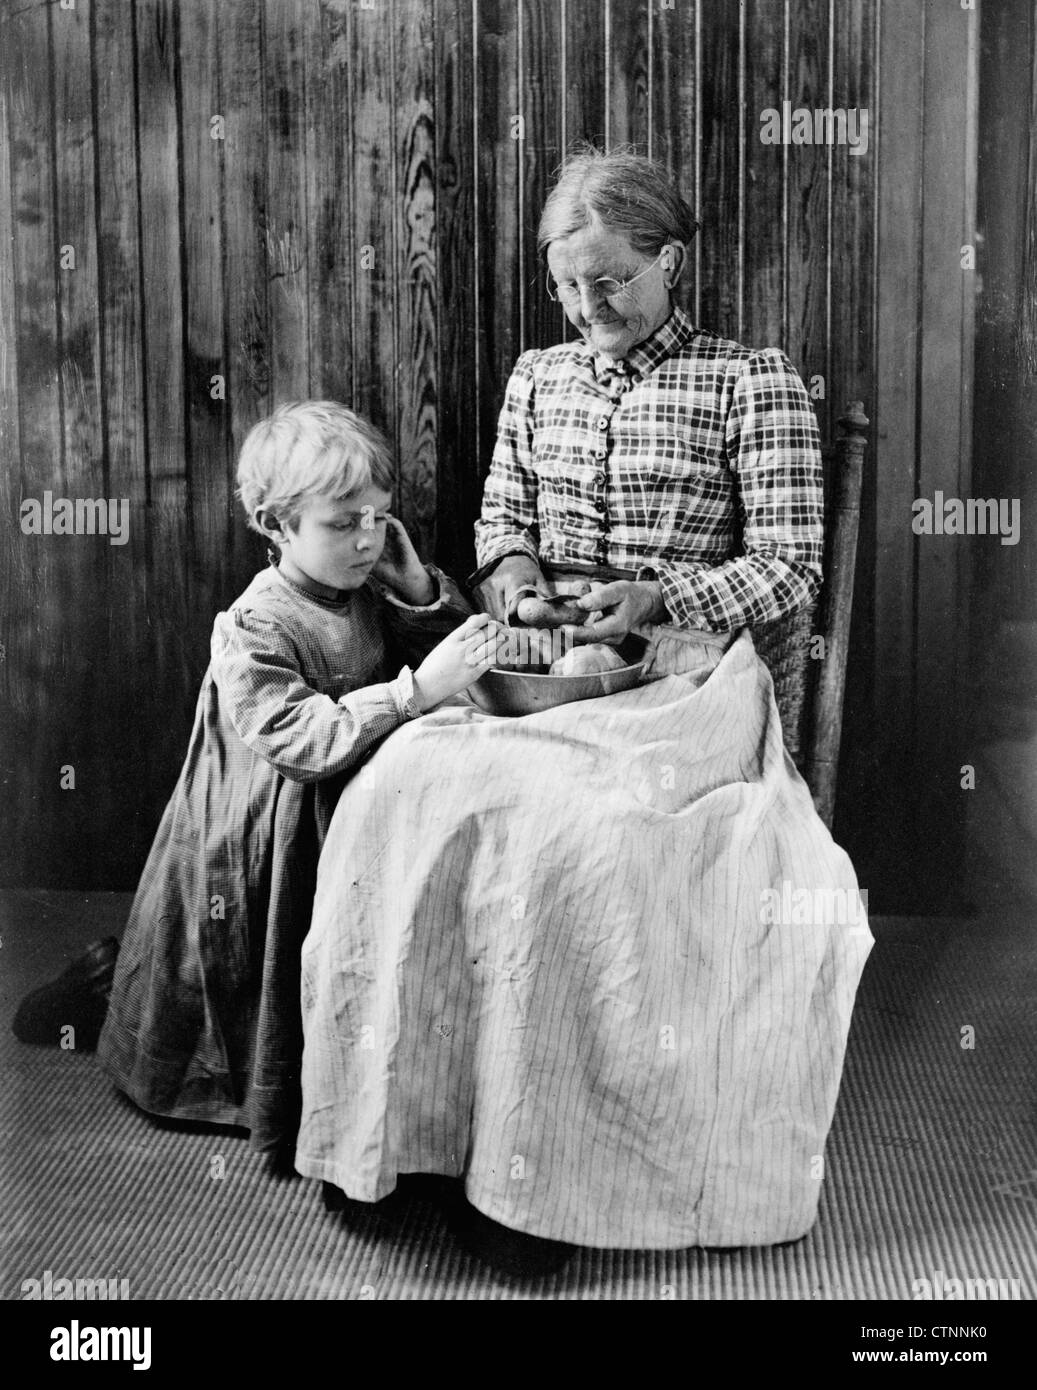 Anticipation - an elderly woman seated in a chair peeling potatoes with a young girl, possibly a granddaughter, kneeling on the floor next to her, watching, circa 1897 Stock Photo